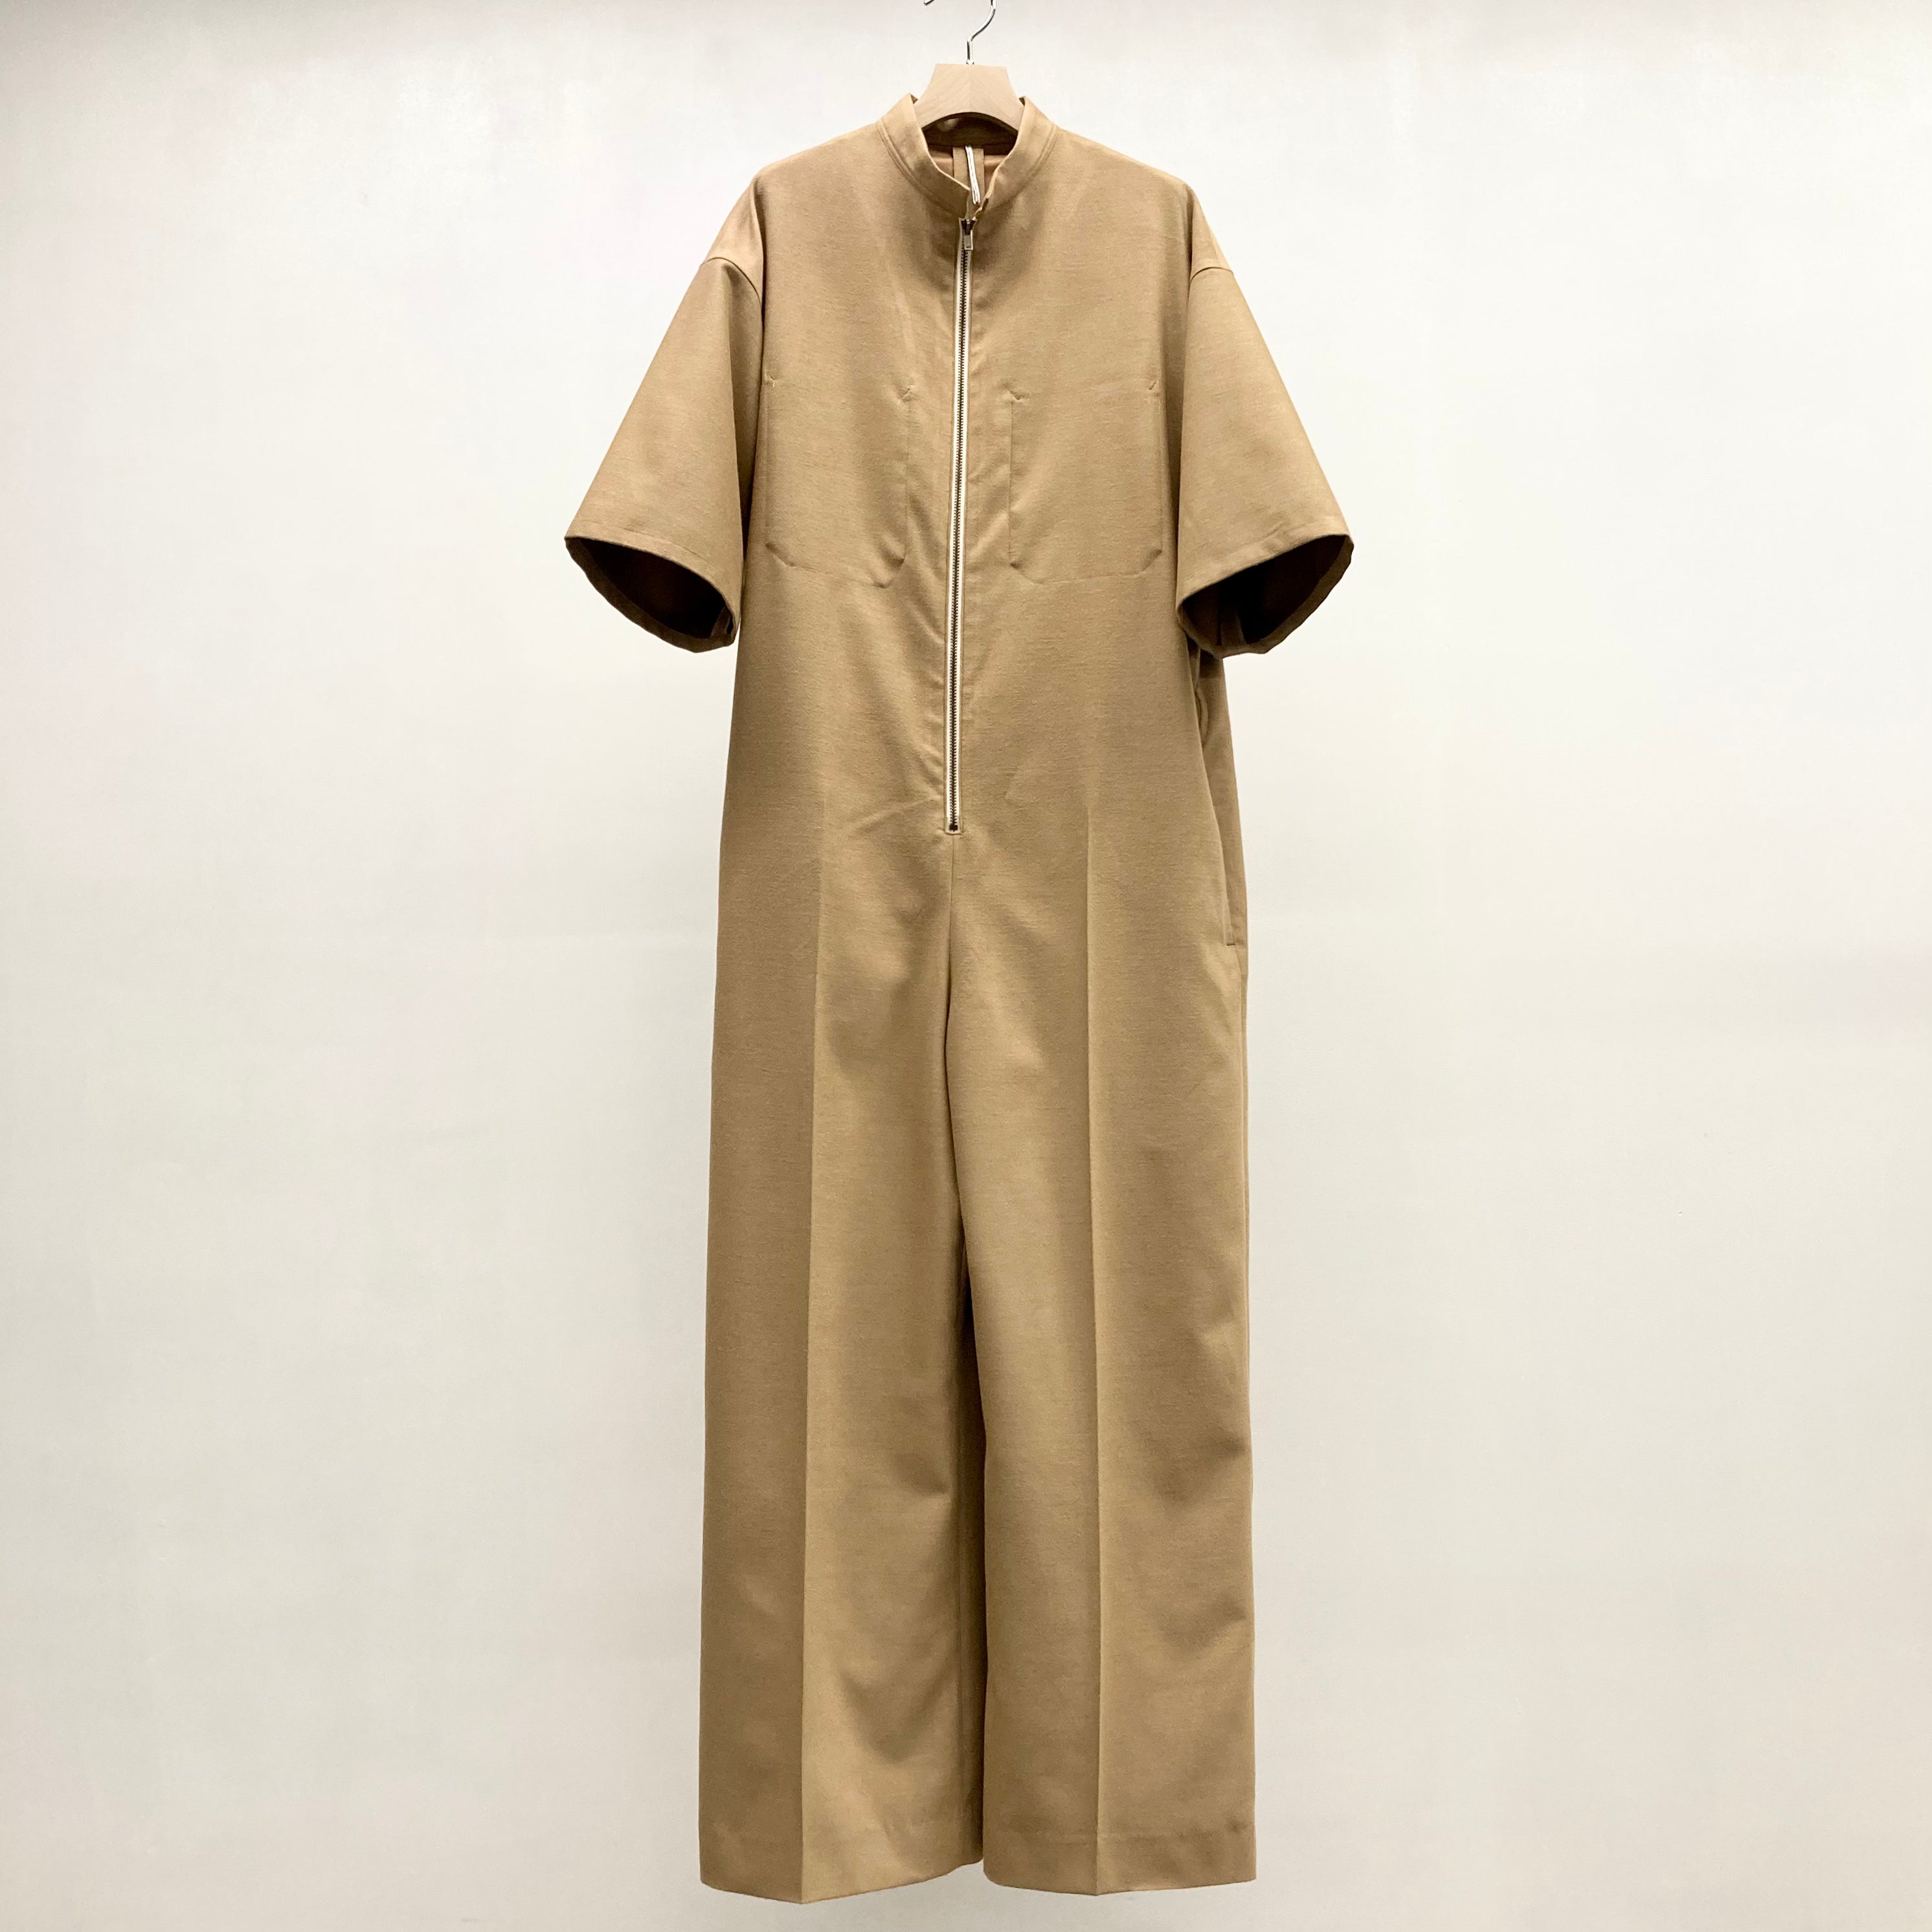 m's braque】HALF SLEEVES JUMP SUIT / Camel – TOKIS